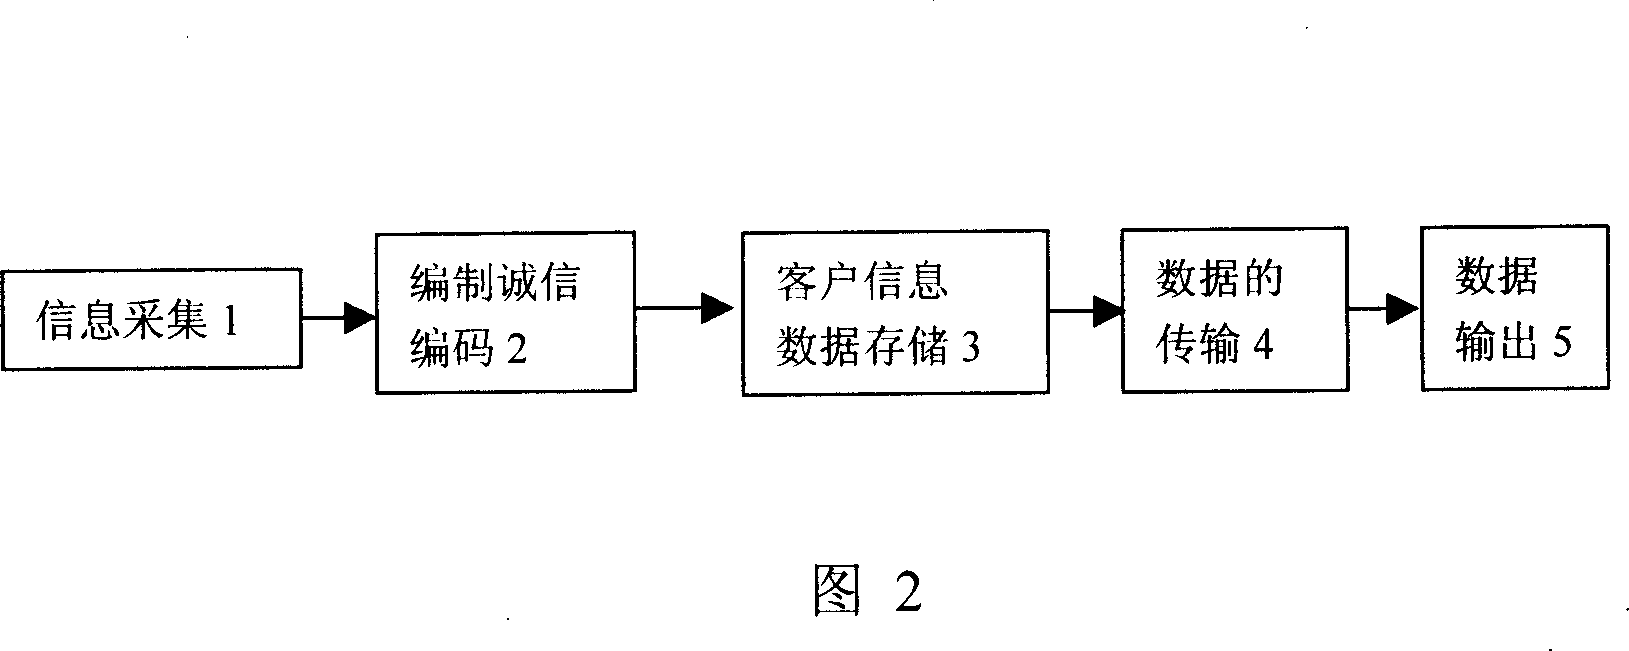 Credible fidelity searching system and method